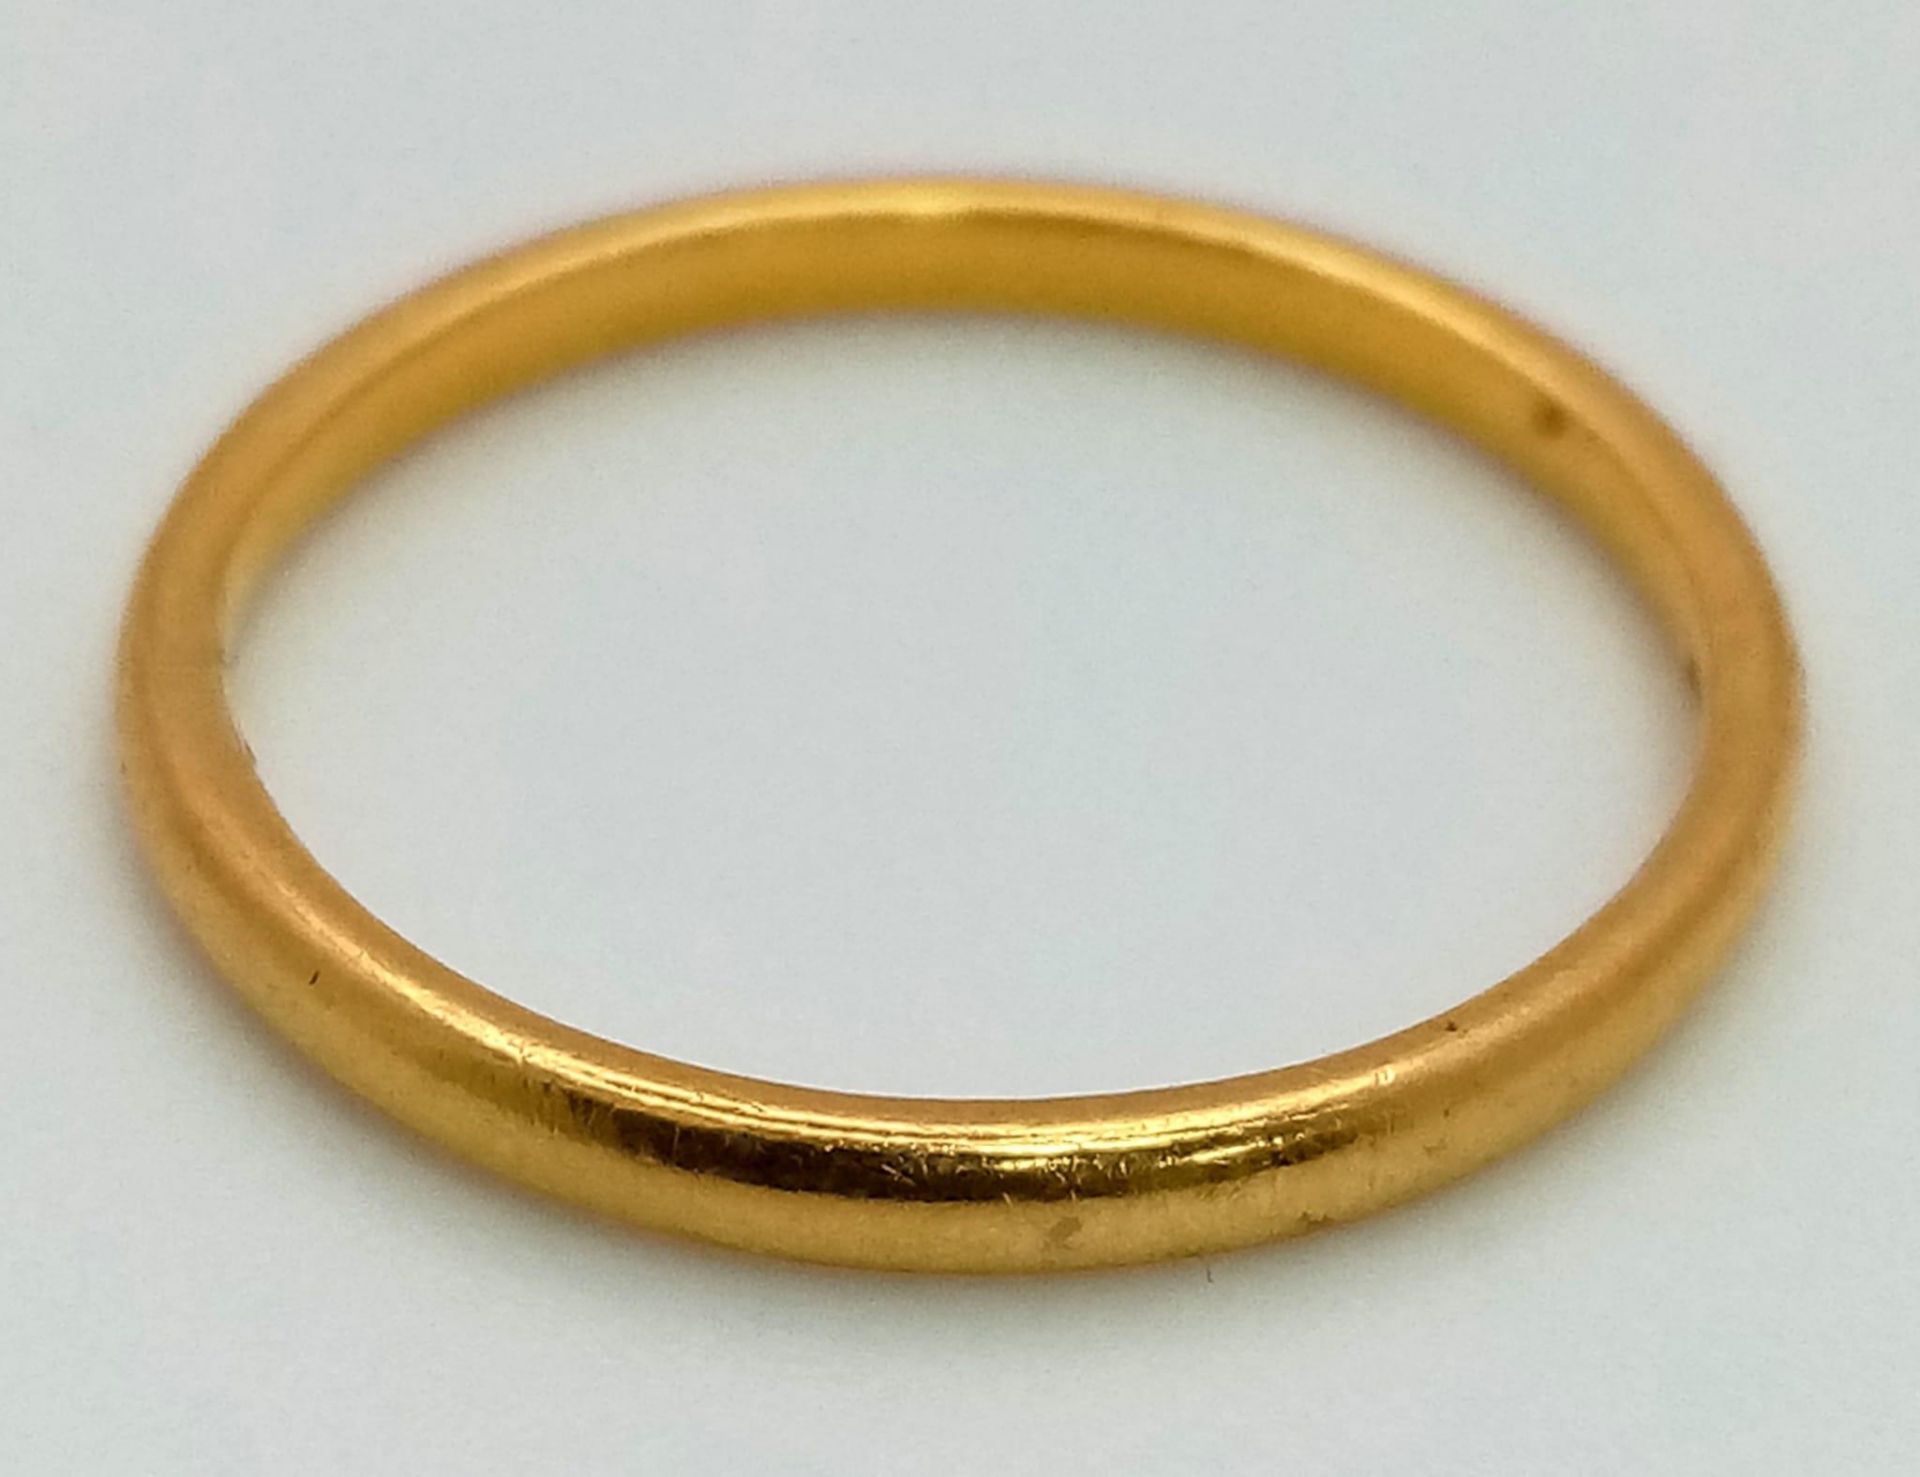 A Vintage 22K Yellow Gold Thin Band Ring. Size M. 1.84g - Image 3 of 4